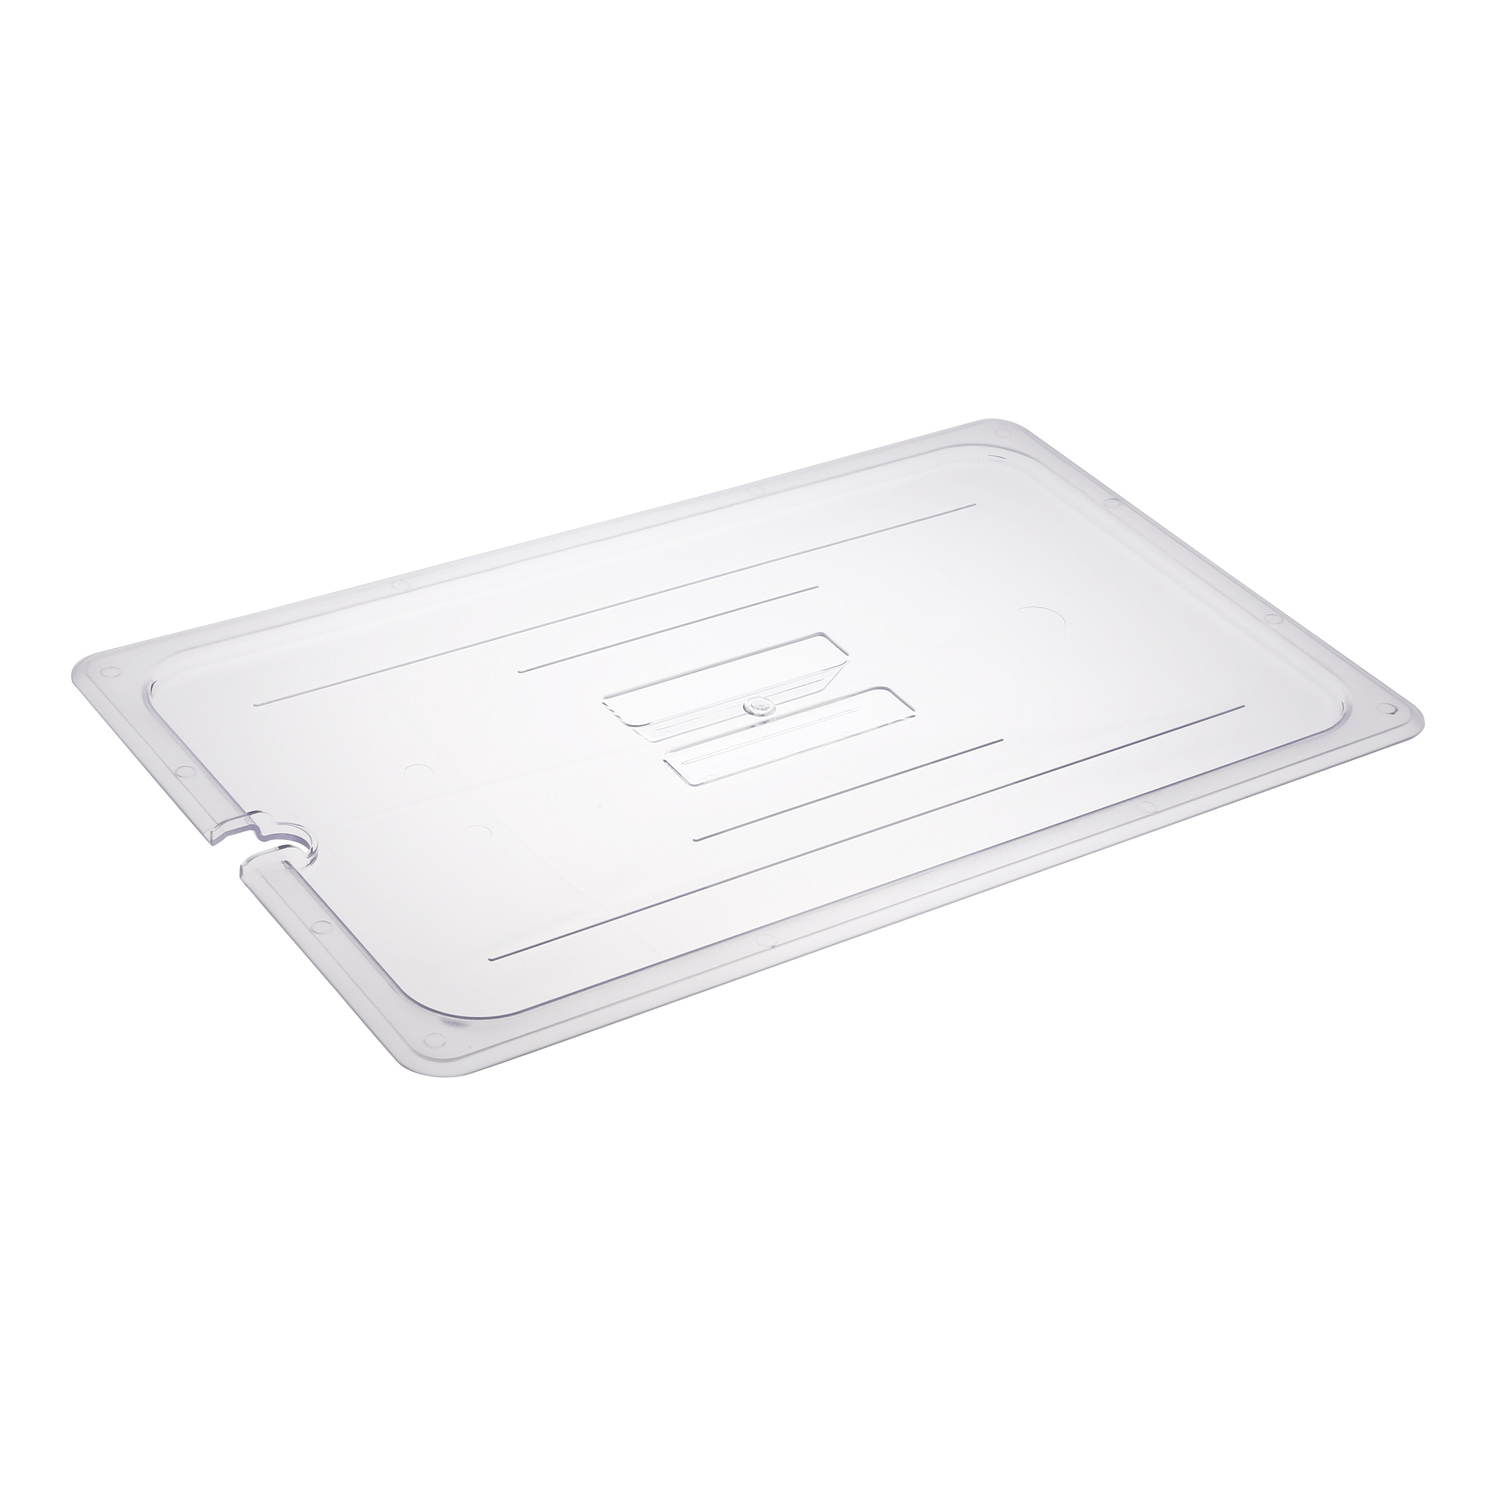 CAC China PCSL-FC Full Size Polycarbonate Food Pan Cover with Notch